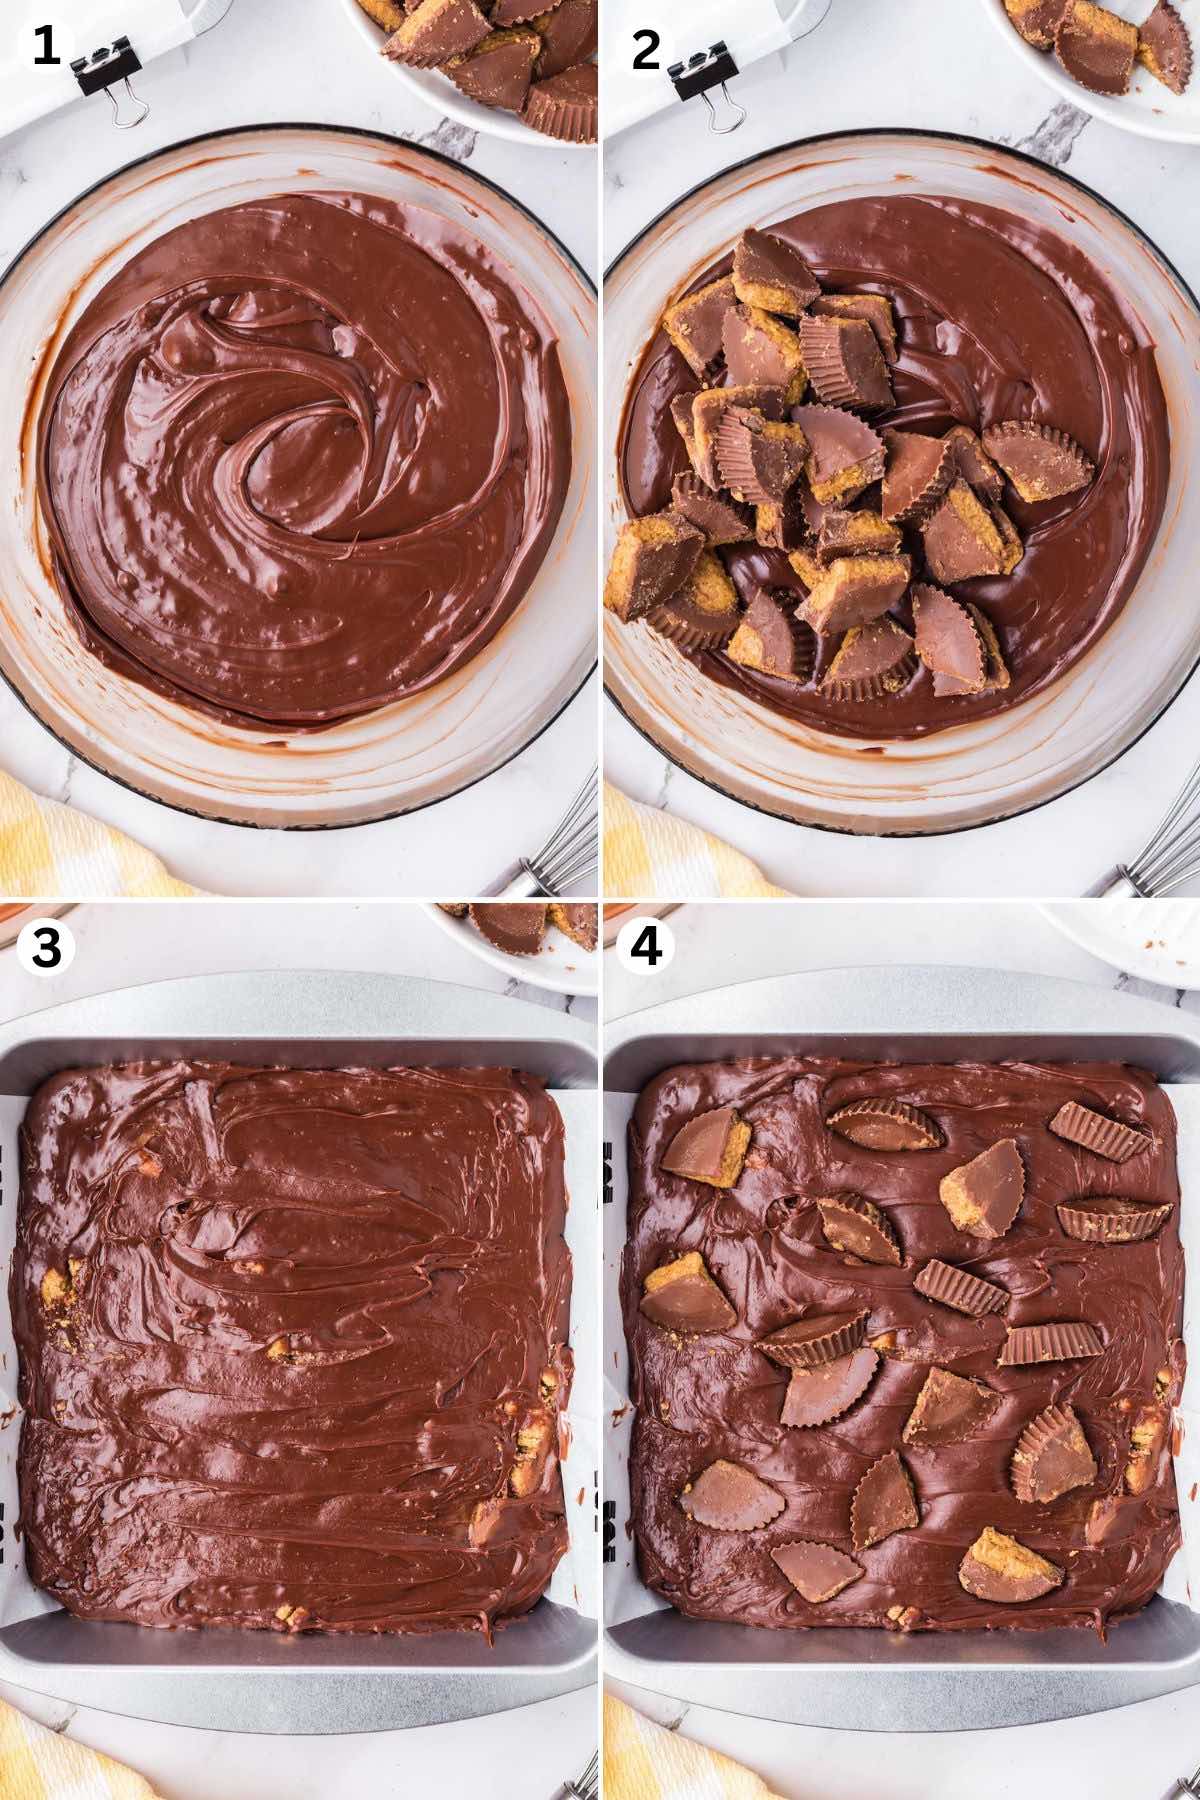 melted chocolate chips in a bowl. add reese's cups into the bowl. pour fudge mixture into the square baking tray. top with a couple reese's.